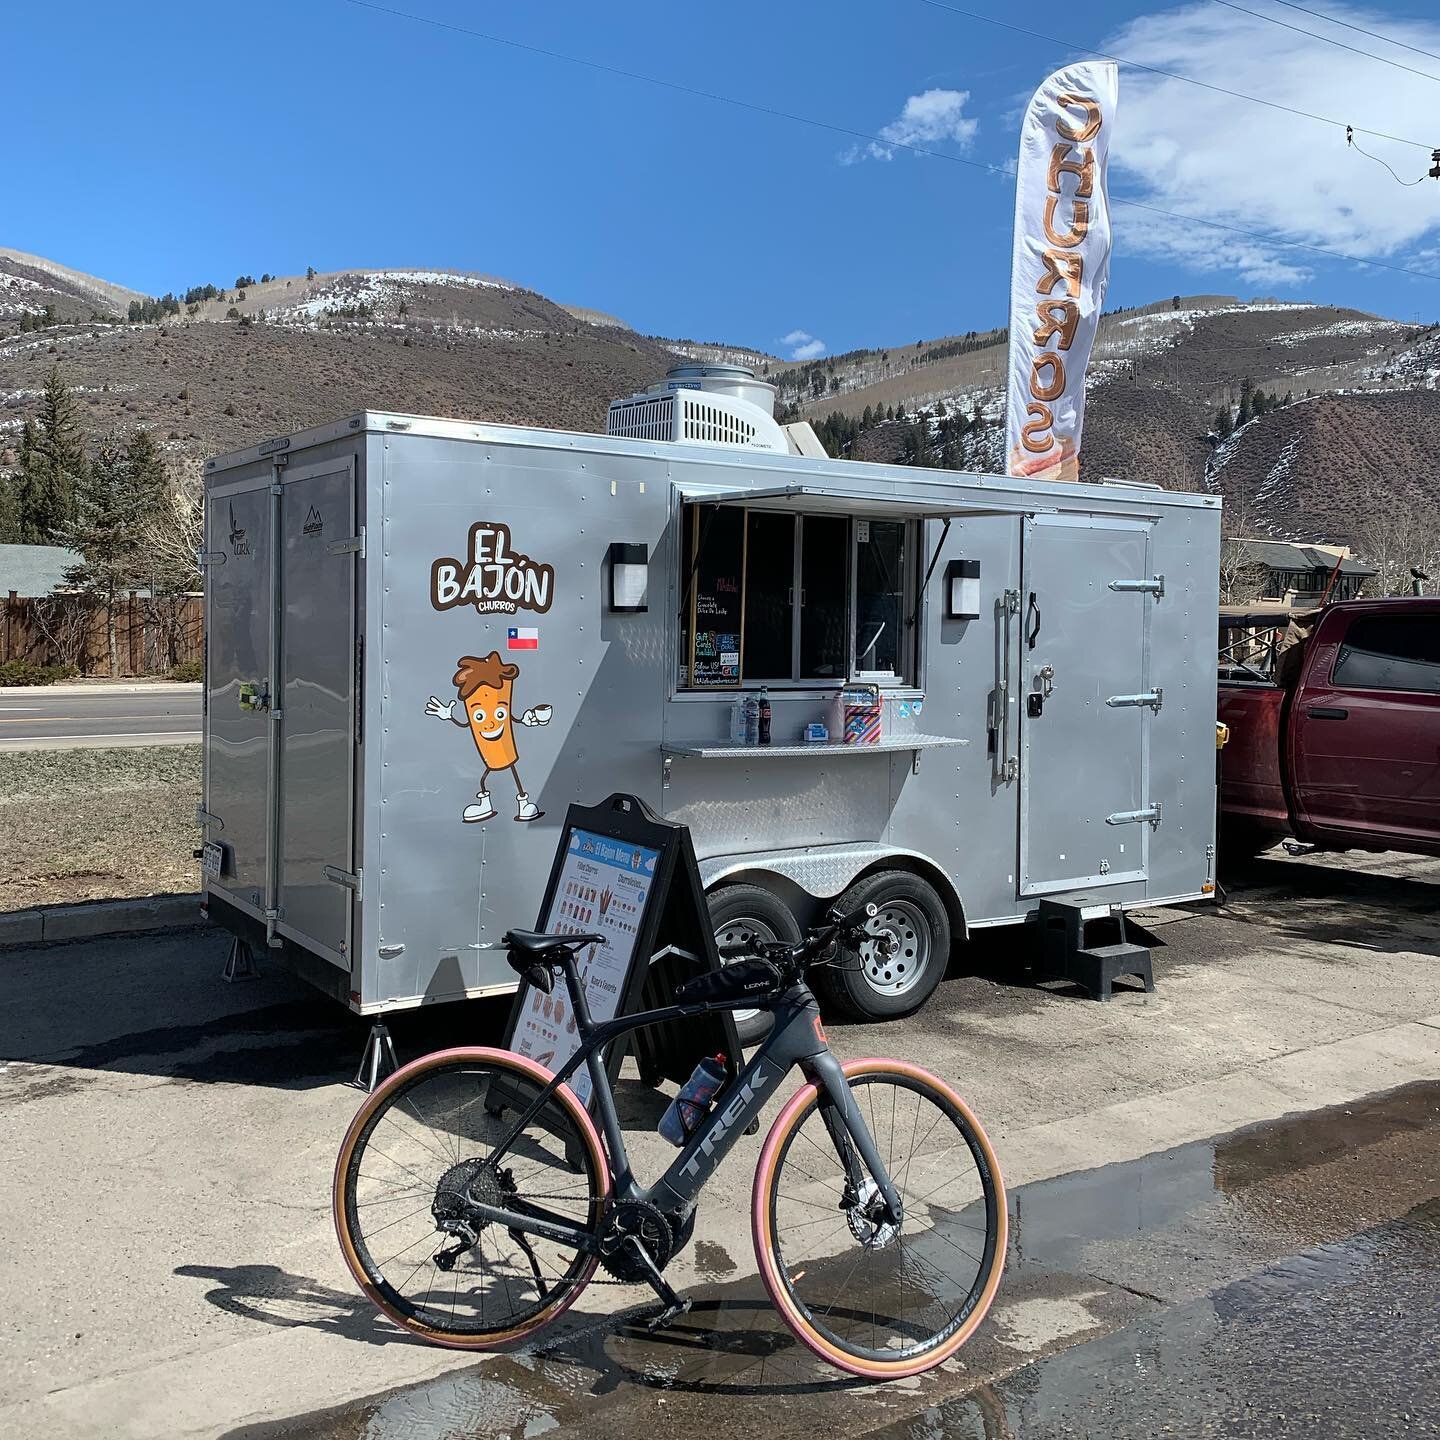 Who&rsquo;s hungry? 😋 @elbajonchurros is at Pedal Power TODAY! If you haven&rsquo;t tried their filled churros, you&rsquo;re missing out! Open now until 6pm. (We&rsquo;ll also be here until 6 today.)